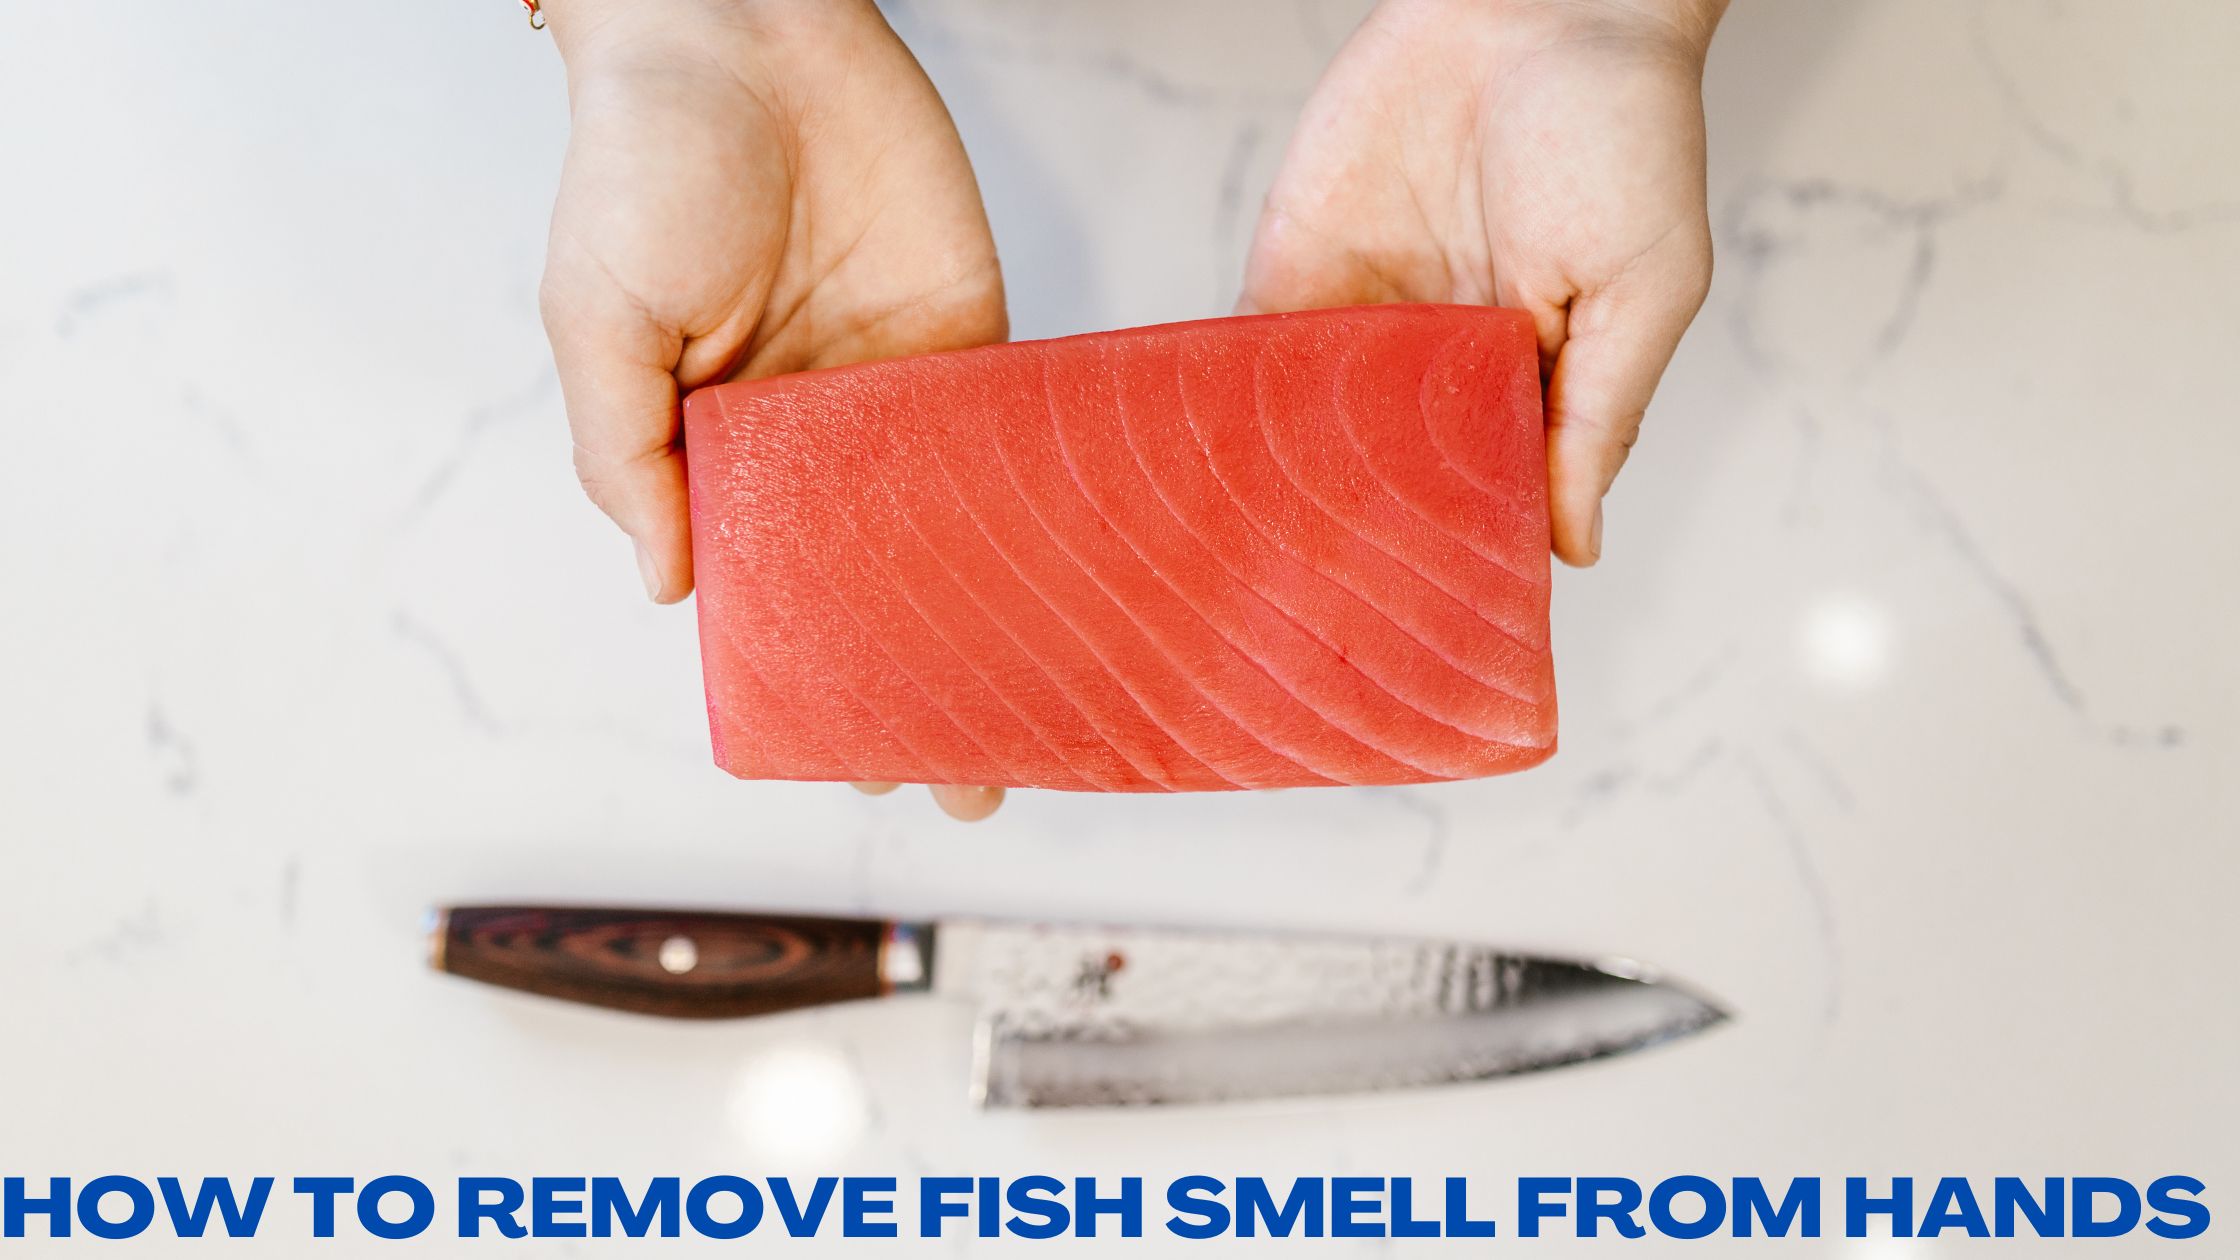 how to remove fish smell from hands in malayalam remove fish smell remove fish smell before cooking how to remove fish smell in car how to get fish smell off hands fish smell remove from hand how to remove fish smell how to get rid of fishy smell from hands how to remove smell of fish from hands how to remove fish odor from hands remove fish smell from hands